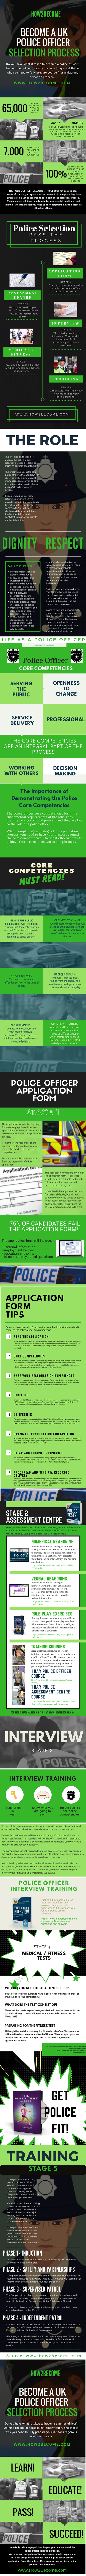 Become a UK Police Officer Selection Process The ULTIMATE Guide [Infographic] How2Become.com